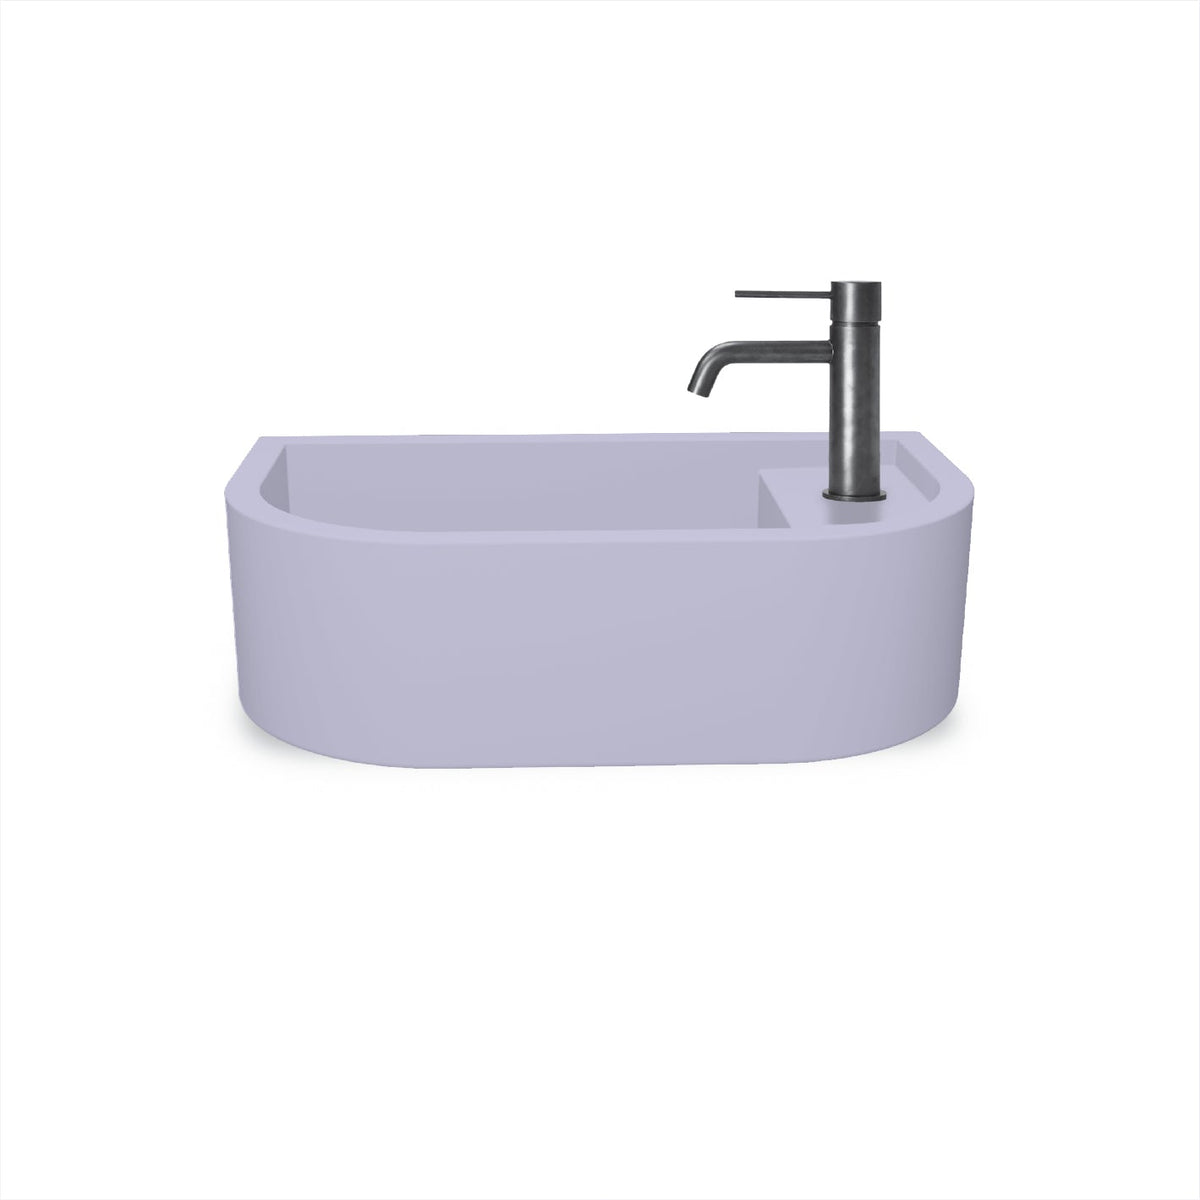 Loop 01 Basin - Overflow - Wall Hung (Lilac,Tap Hole,Chrome)